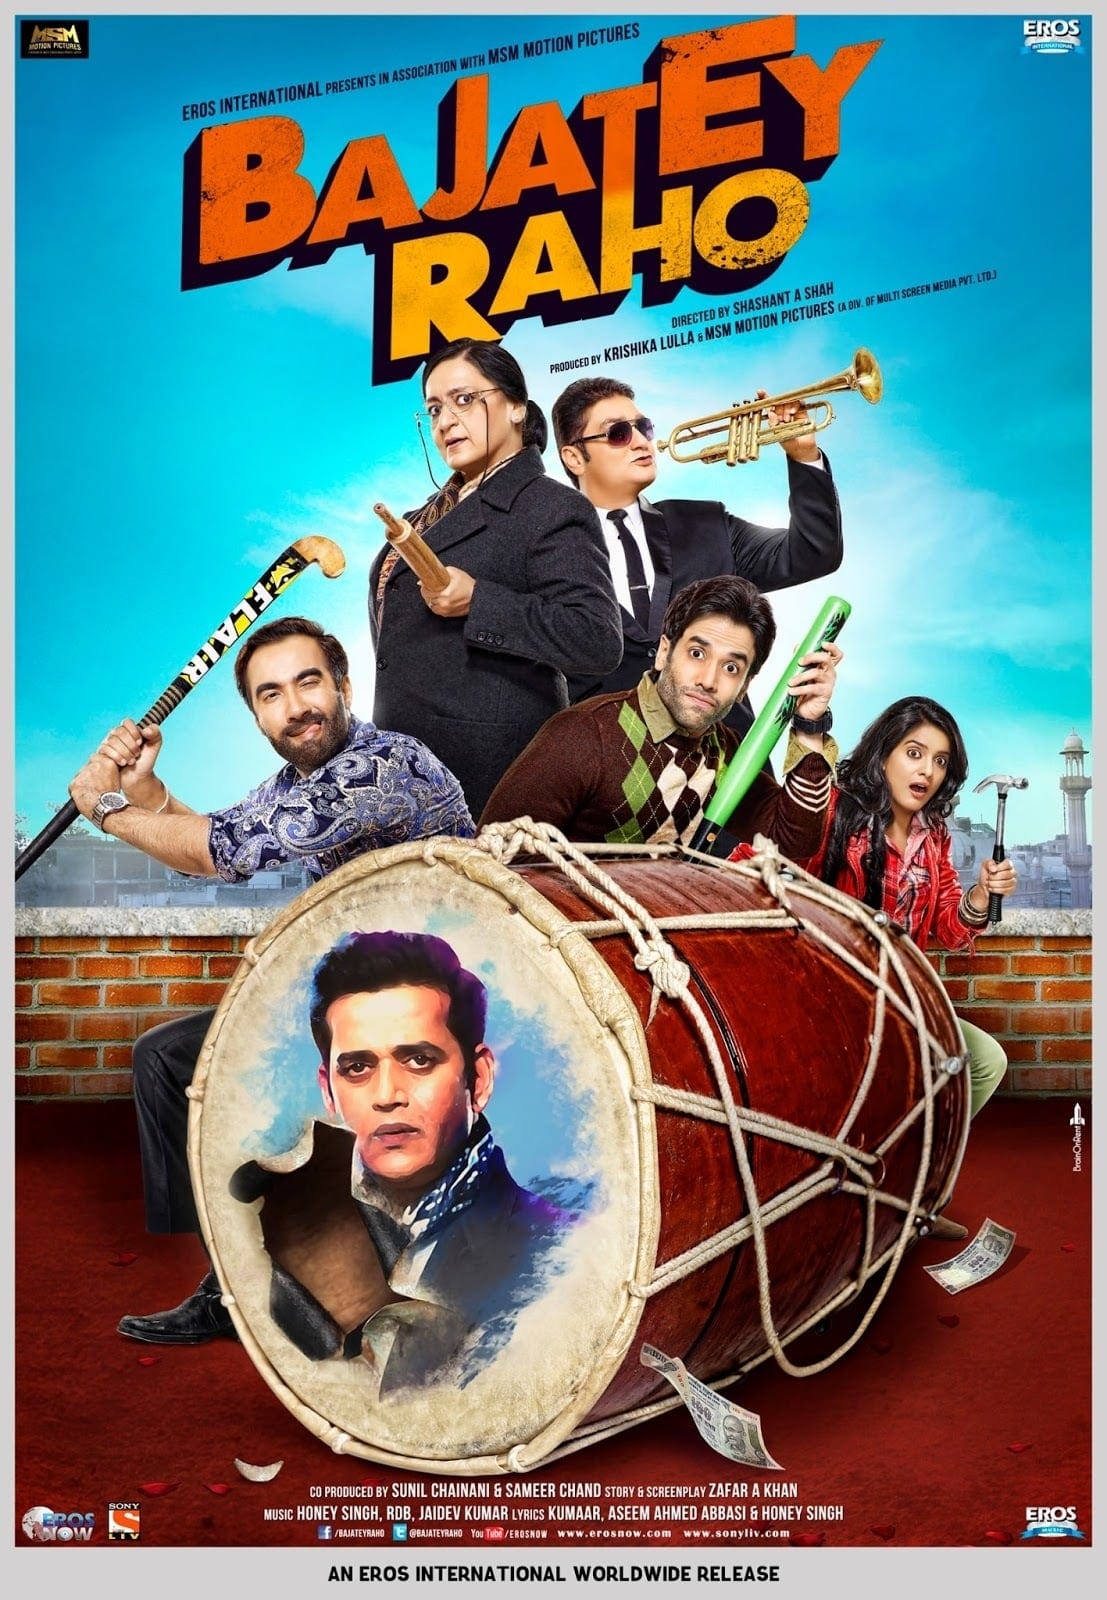 Poster for the movie "Bajatey Raho"